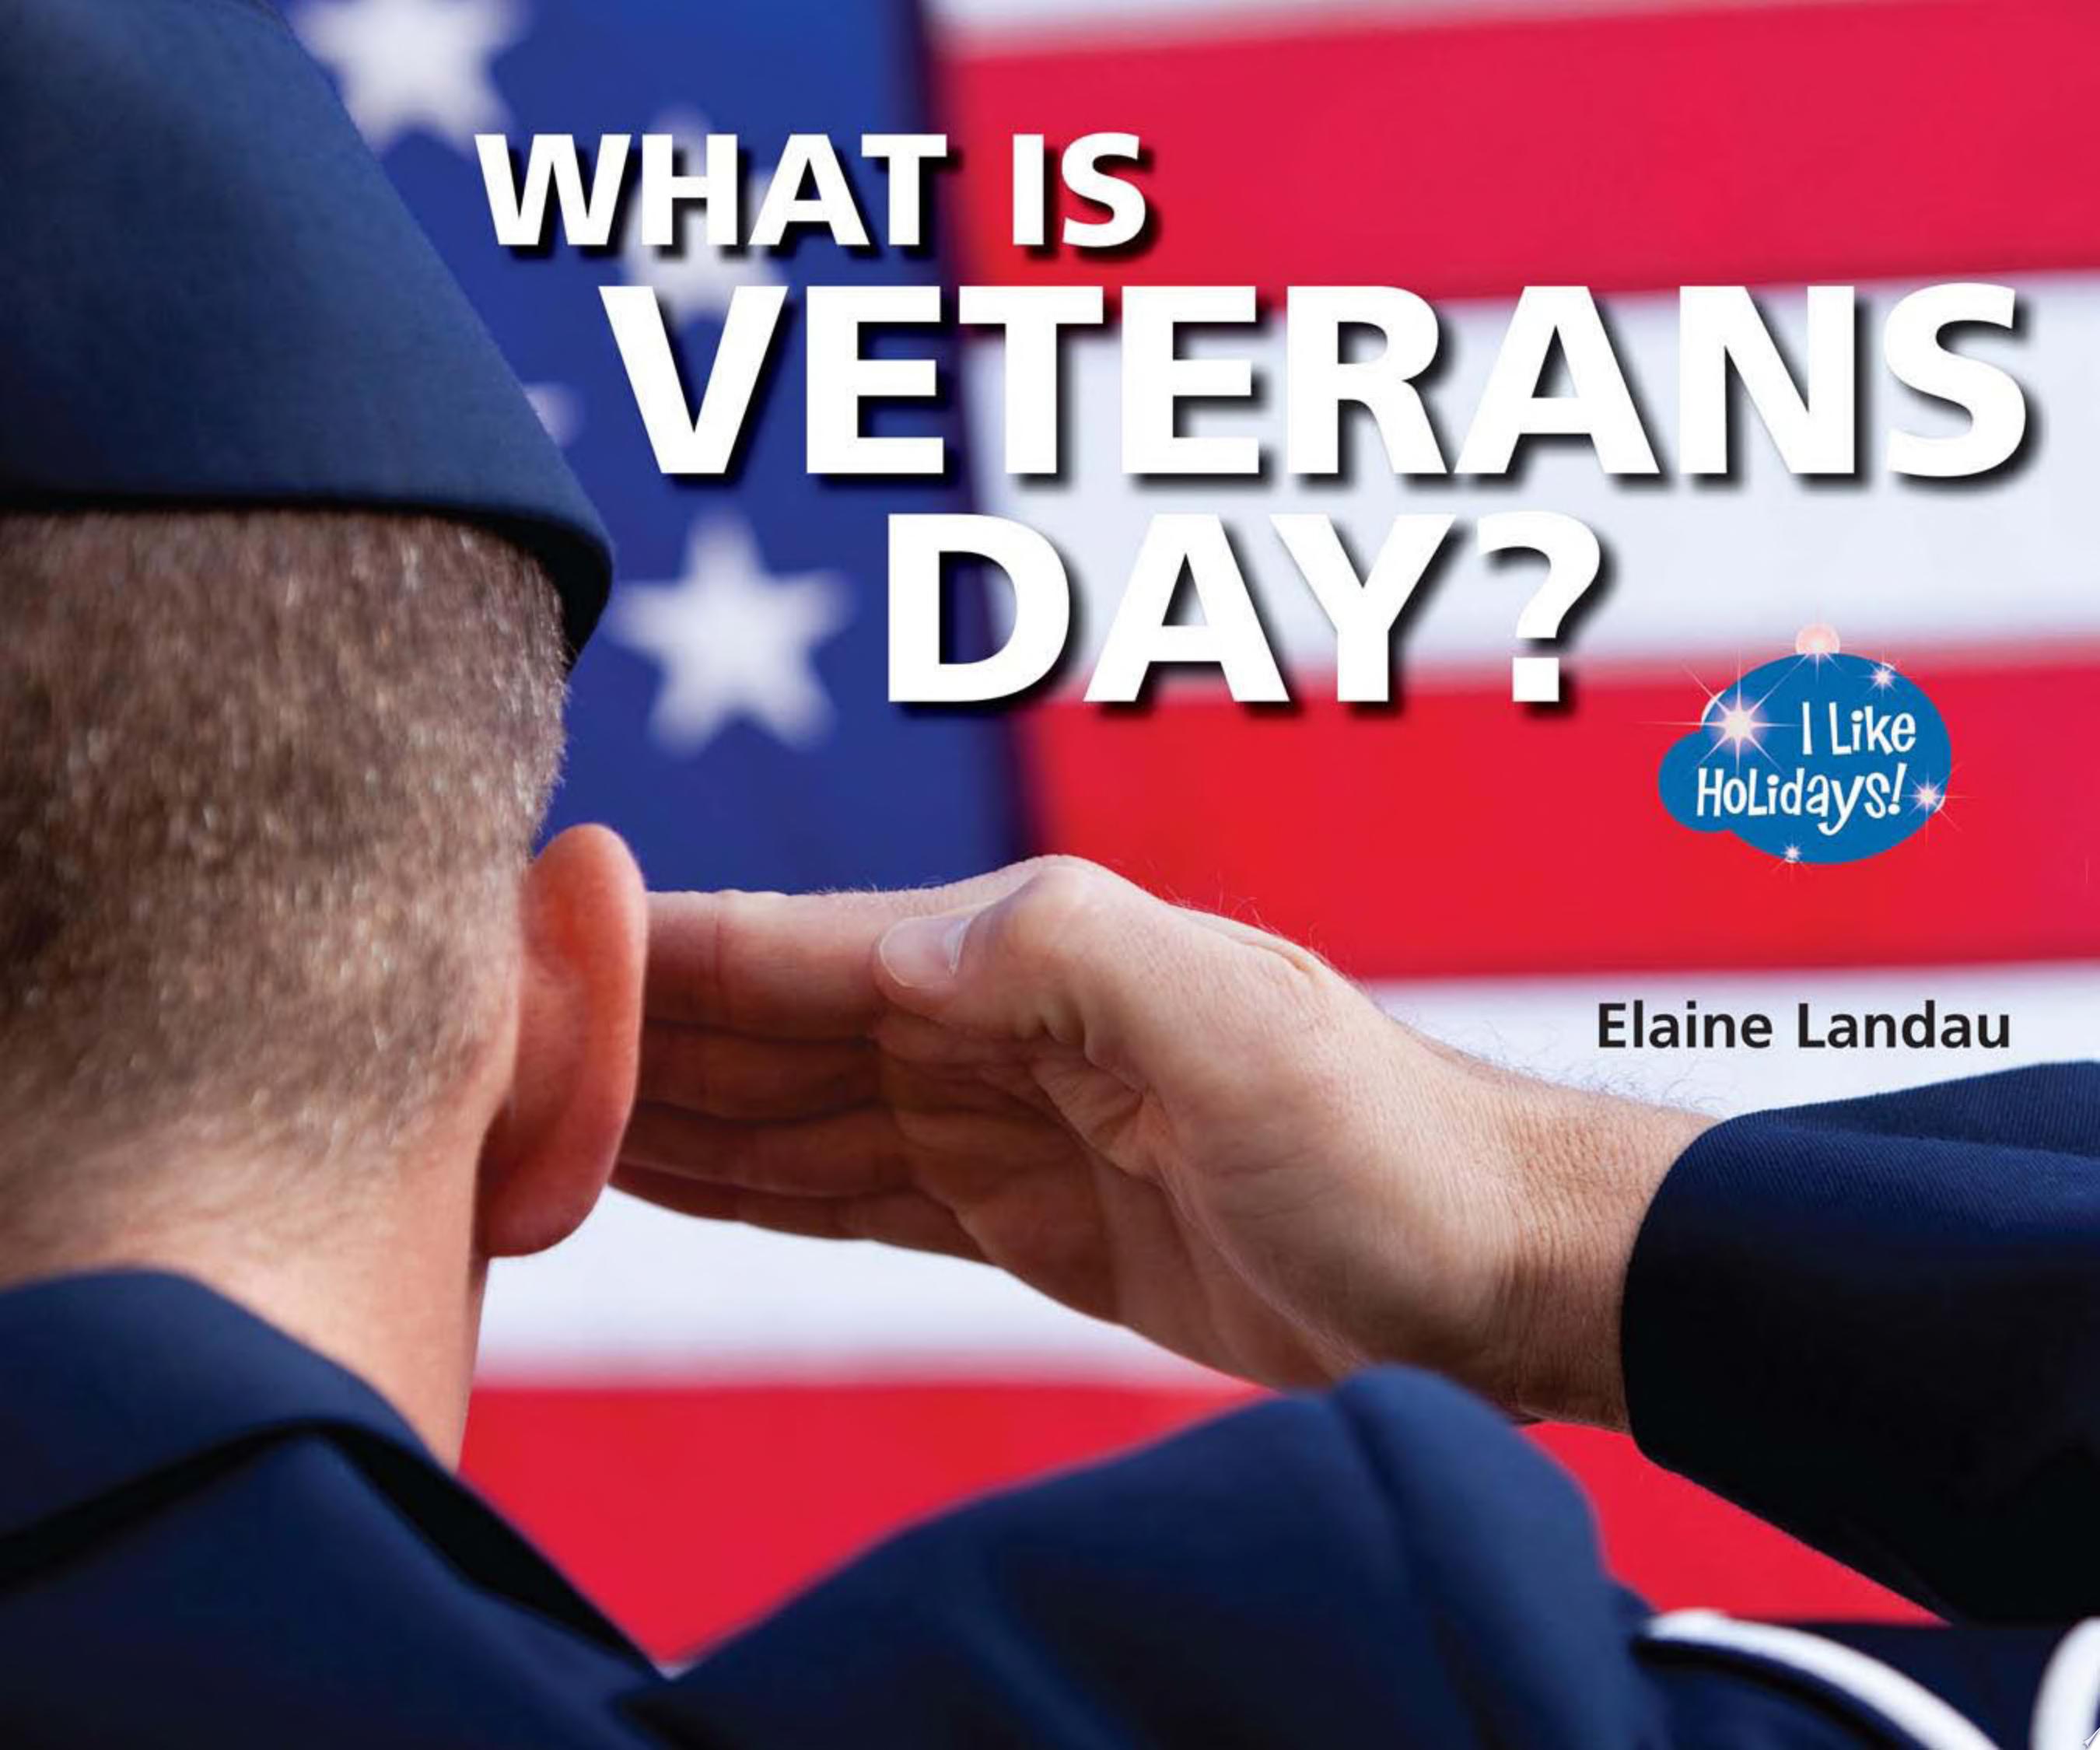 Image for "What Is Veterans Day?"